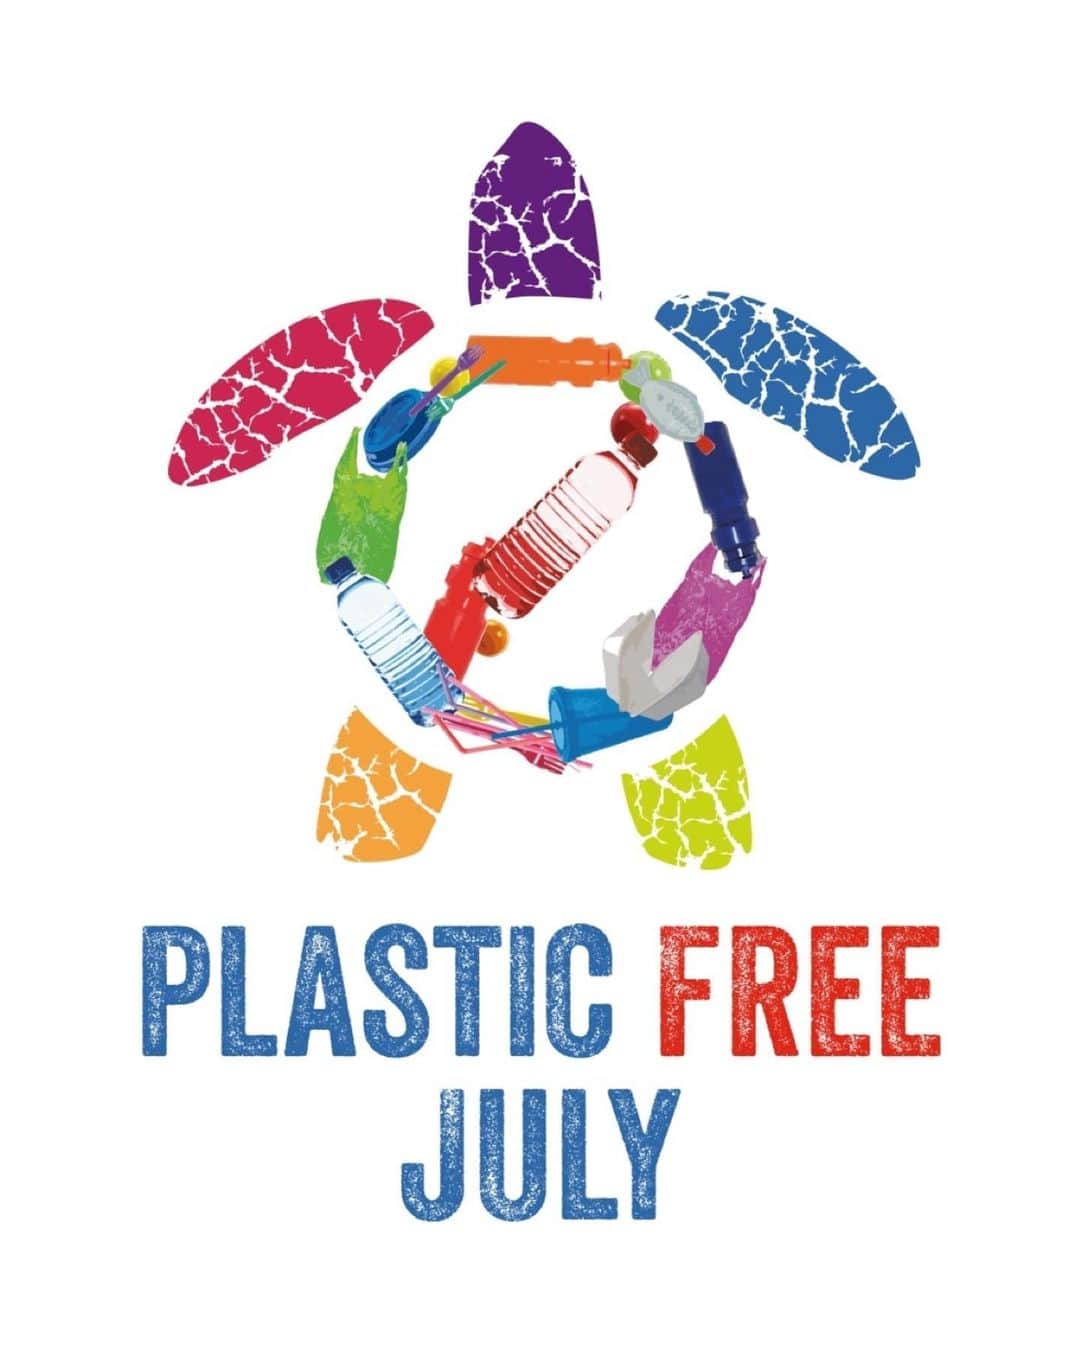 メロディー・モリタさんのインスタグラム写真 - (メロディー・モリタInstagram)「With our daily lives and the world changing day by day, I wanted to share regarding Plastic Free July today and how we can be more mindful of the environment, even while staying at home.  40,000,000,000 pieces of non-recyclable single-use plastic cutlery are disposed per year. With this, recently, UberEats and Postmates were convinced to #cutoutcutlery and change their default settings so that no one receives plastic cutlery unless requested. With more people utilizing takeout/delivery services due to the current situation, we all need to come together to convince other major services such as Grubhub and DoorDash to join in so we can create a new norm.  This movement does not mean that you need to get rid of plastic you already have. However, please help to convert and make a positive change one piece at a time as we continue to strive for a safer, healthier world.🌎💚✨  今、世の中が目まぐるしく変化していく中、家にいながらでも自分達にできることについてなど、国連で環境問題の活動を微力ながら続けさせて頂いております。  今回は #PlasticFreeJuly をシェアします。 #cutoutcutlery というムーブメントを通して、アメリカのUberEatsとPostmatesといった代表的なデリバリーサービスから、カトラリー（プラスチック製フォーク＆ナイフ）を"カット”することにご承諾をいただくことができました。しかし、GrubhubやDoorDashなど他の大手企業にはまだ受け入れてもらえず、交渉中となっています。  コロナウイルスの影響で便利な使い捨てのプラスチックは前年同月よりも増加しています。身の安全を守ることと、プラスチックの使用を減らすことの両立はとても難しい状況となっています。  今既に持っているプラスチック製の物を無理に捨てるということではなく、今の世界的な状況、健康に気をつけながらプラスチックの利用をできる範囲で避け、共に "new normal"（新しい日常）がより良い方向へと進むことに少しでもお力をいただけると嬉しいです。 #UN #unitednations #sdgs #plasticfreejuly #choosetorefuse #国連 #環境問題」7月12日 8時51分 - melodeemorita